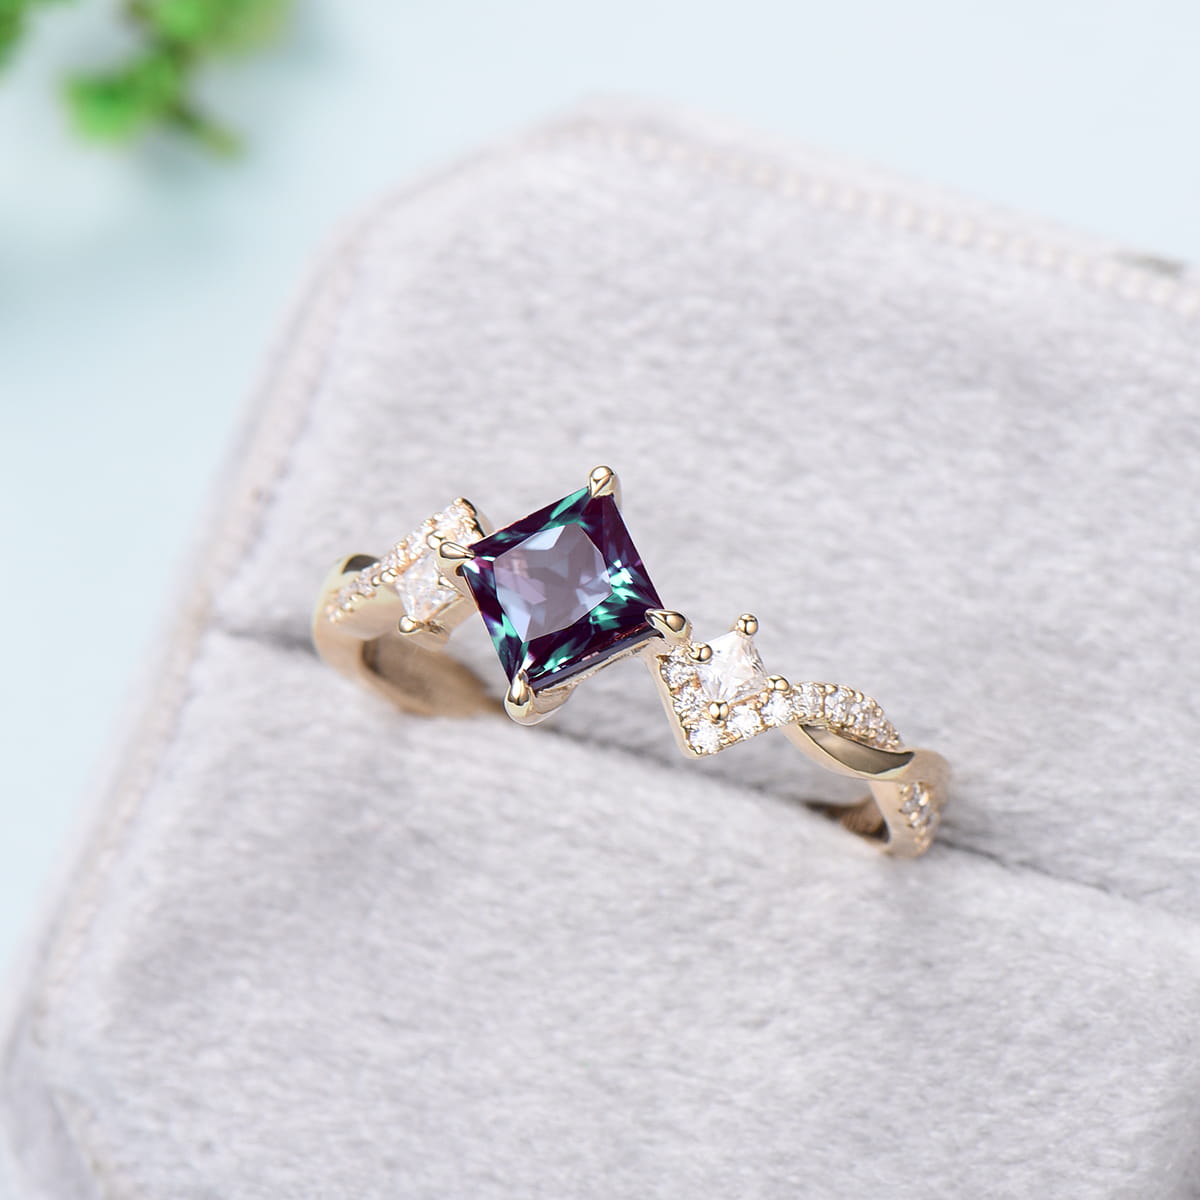 Unique 5mm princess cut alexandrite ring twisted-Dainty alexandrite moissanite engagement ring-White Gold infinity anniversary ring - PENFINE